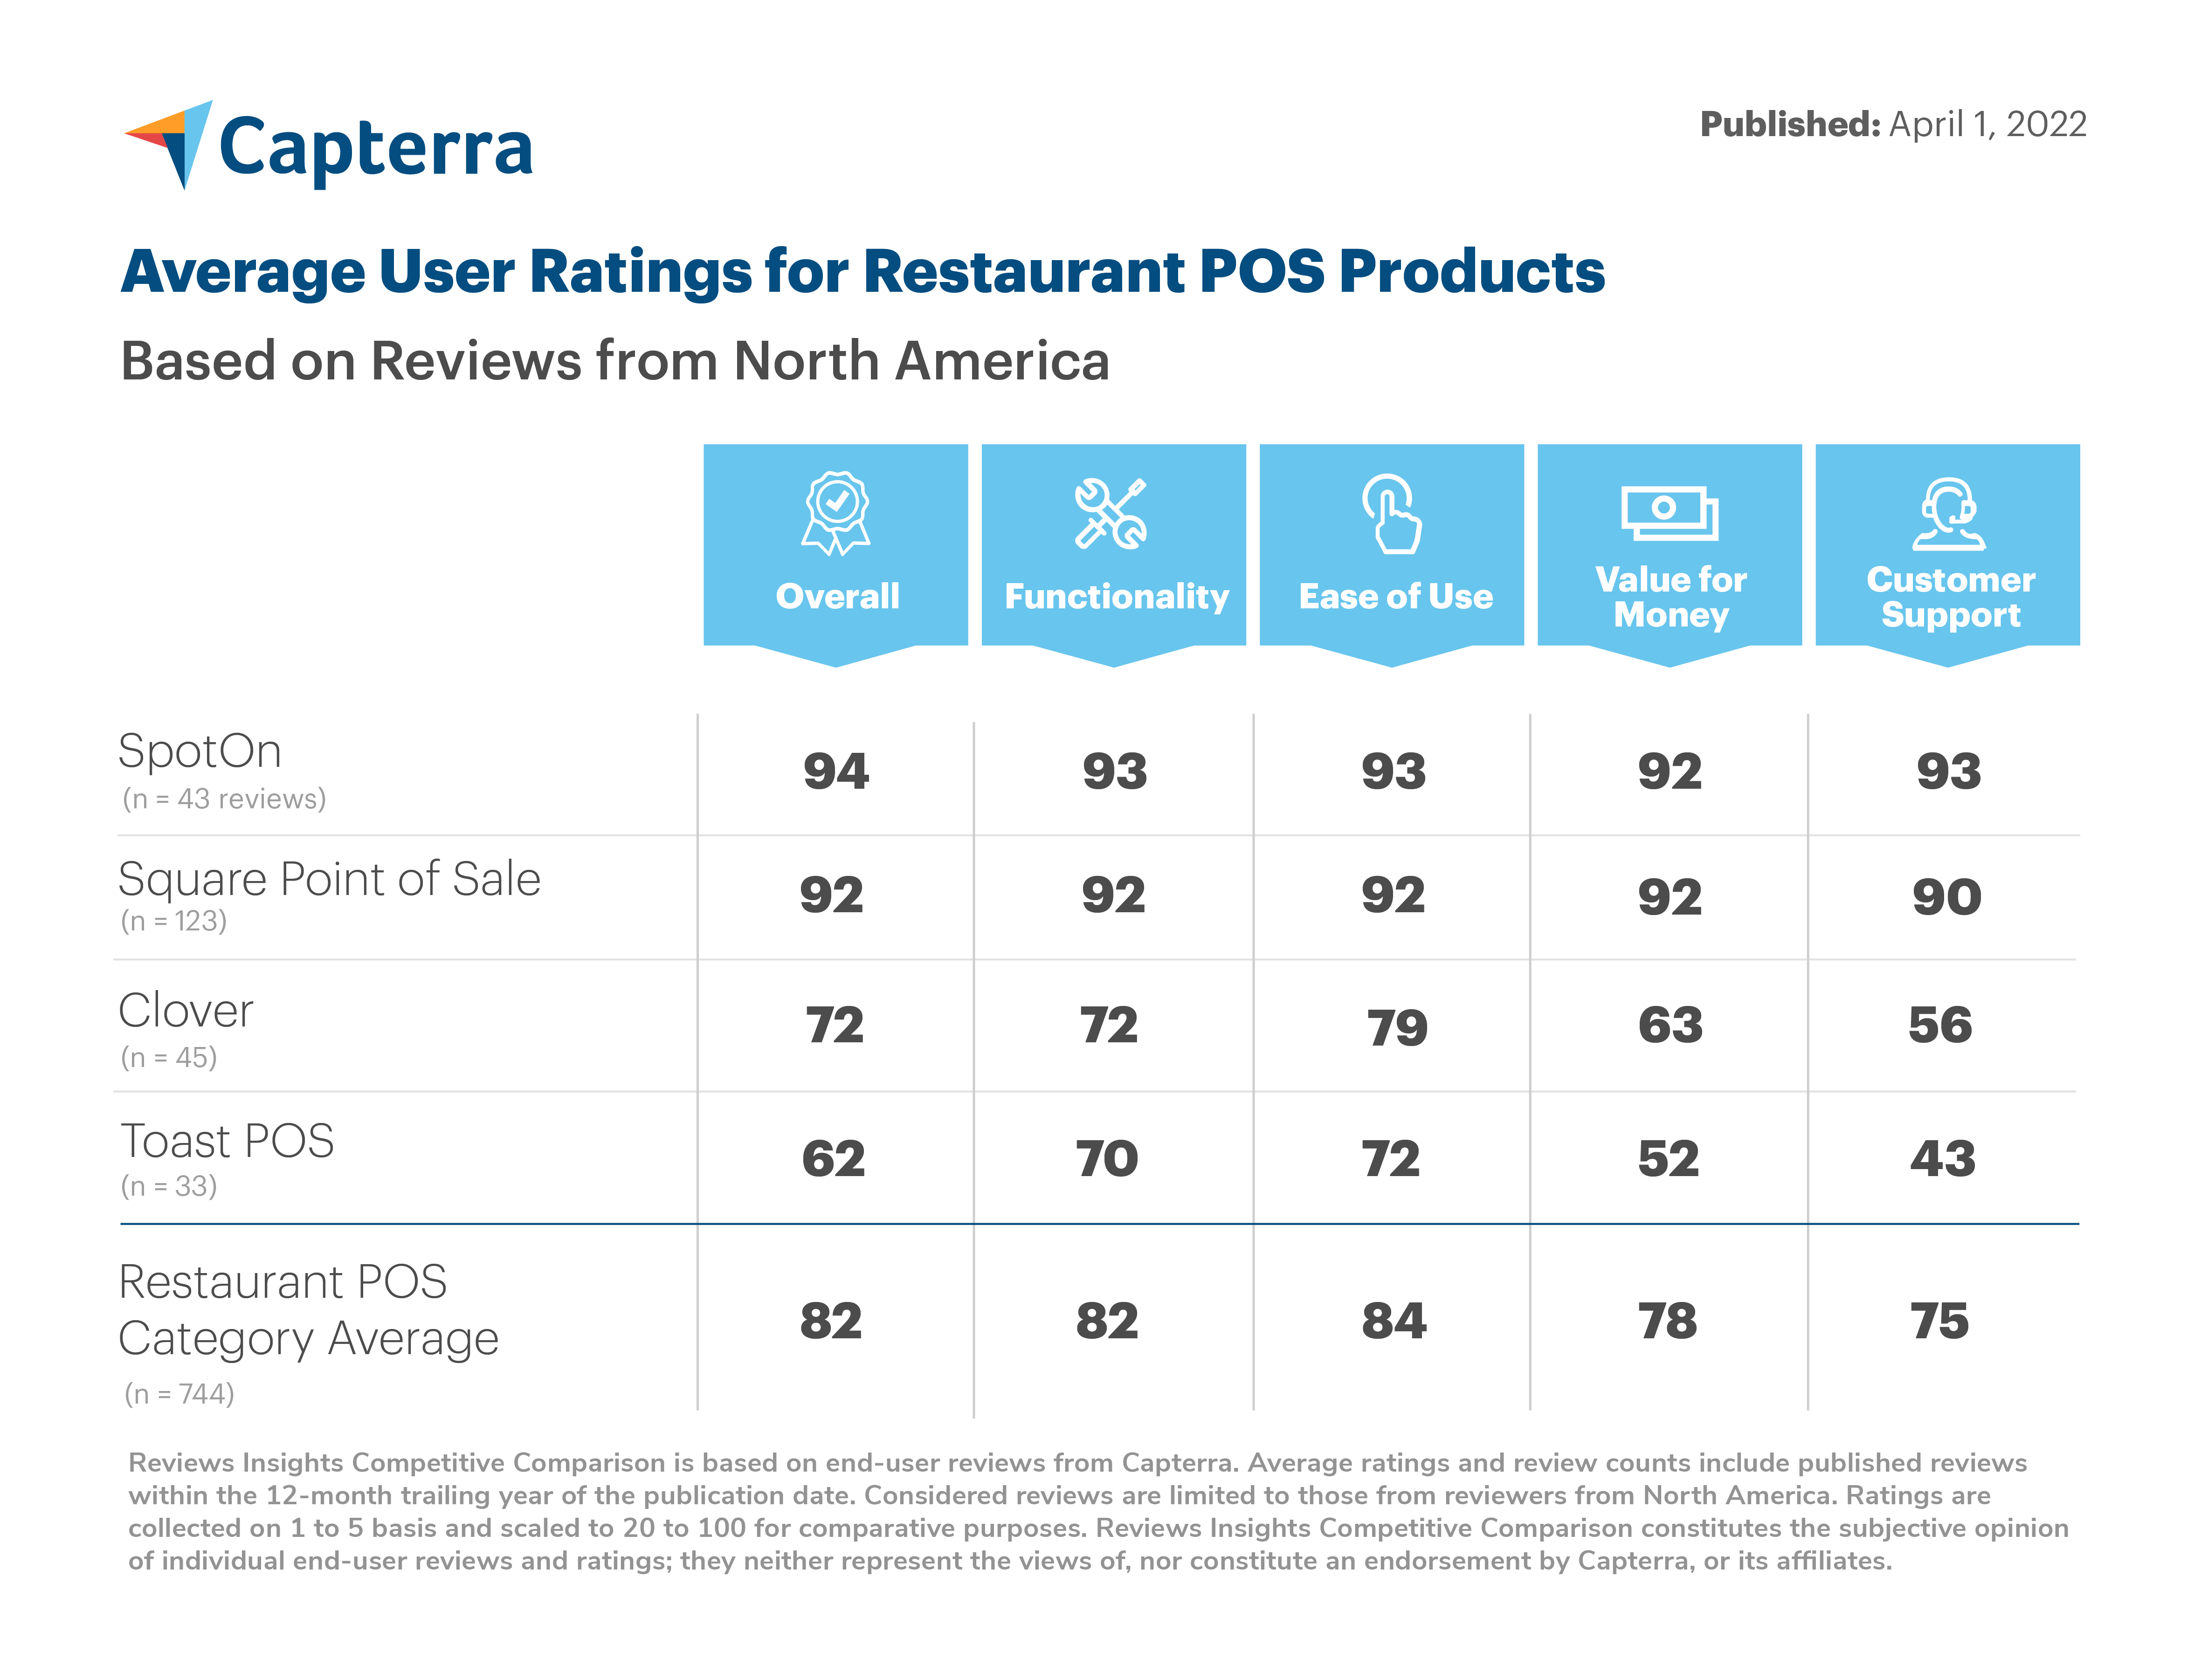 Capterra average user ratings for restaurant POS products: SpotOn 94, Square 92, Clover 72, Toast 62